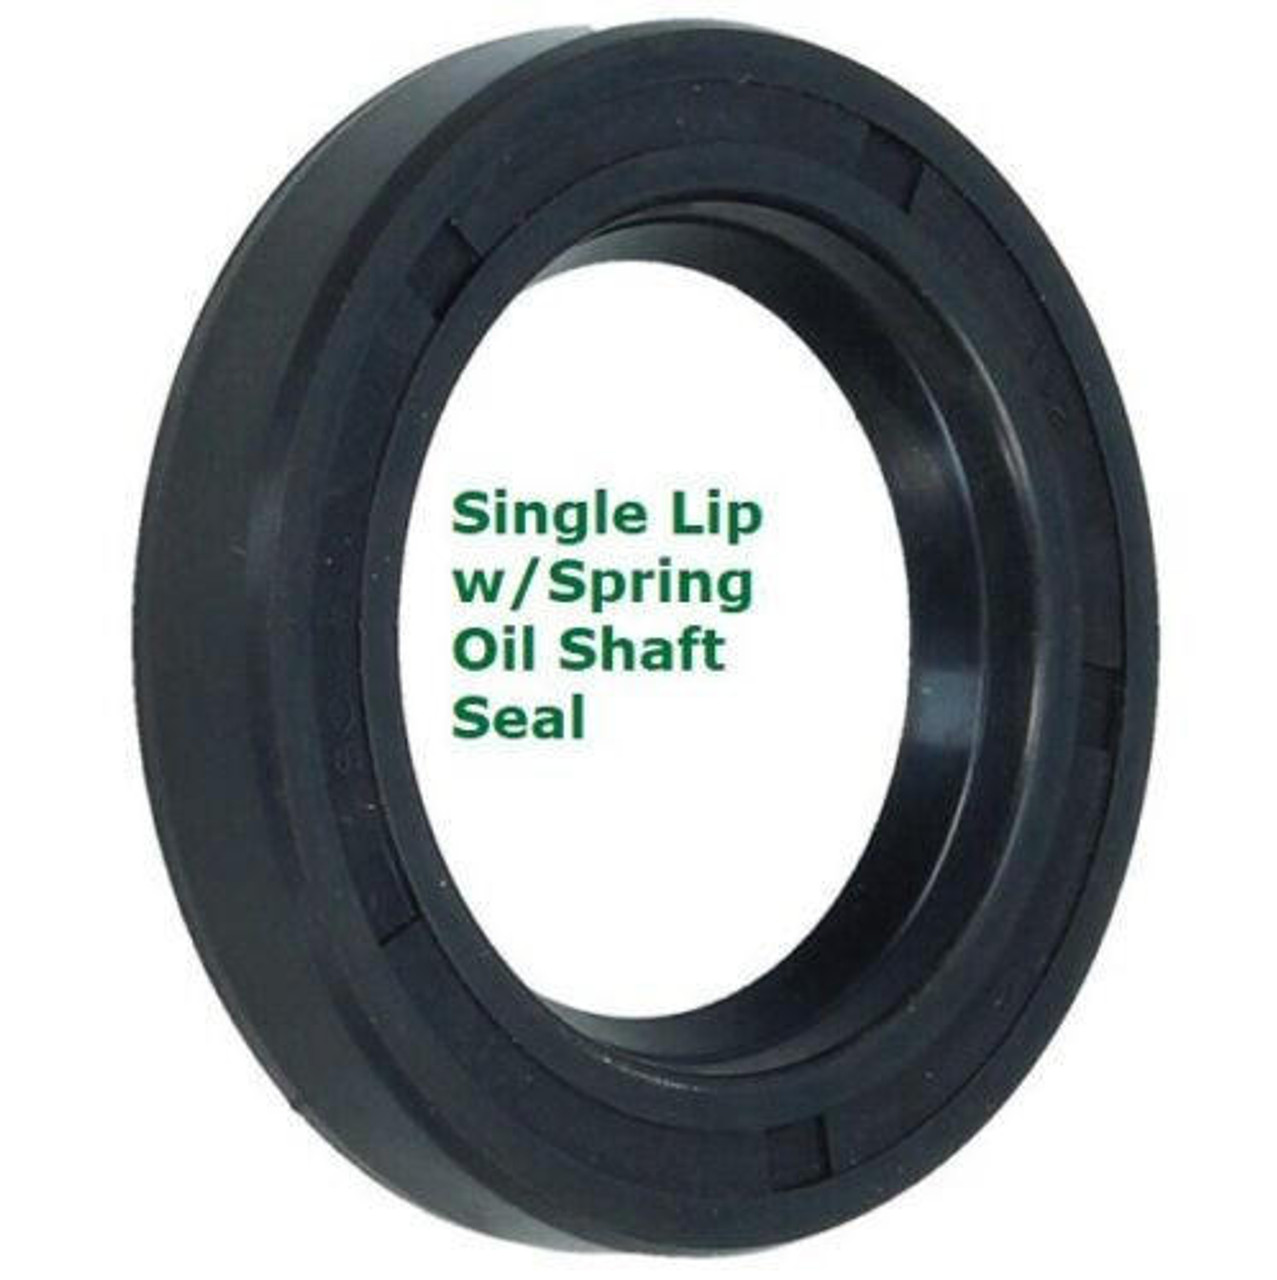 Metric Oil Shaft Seal 100 x 120 x 13mm   Price for 1 pc